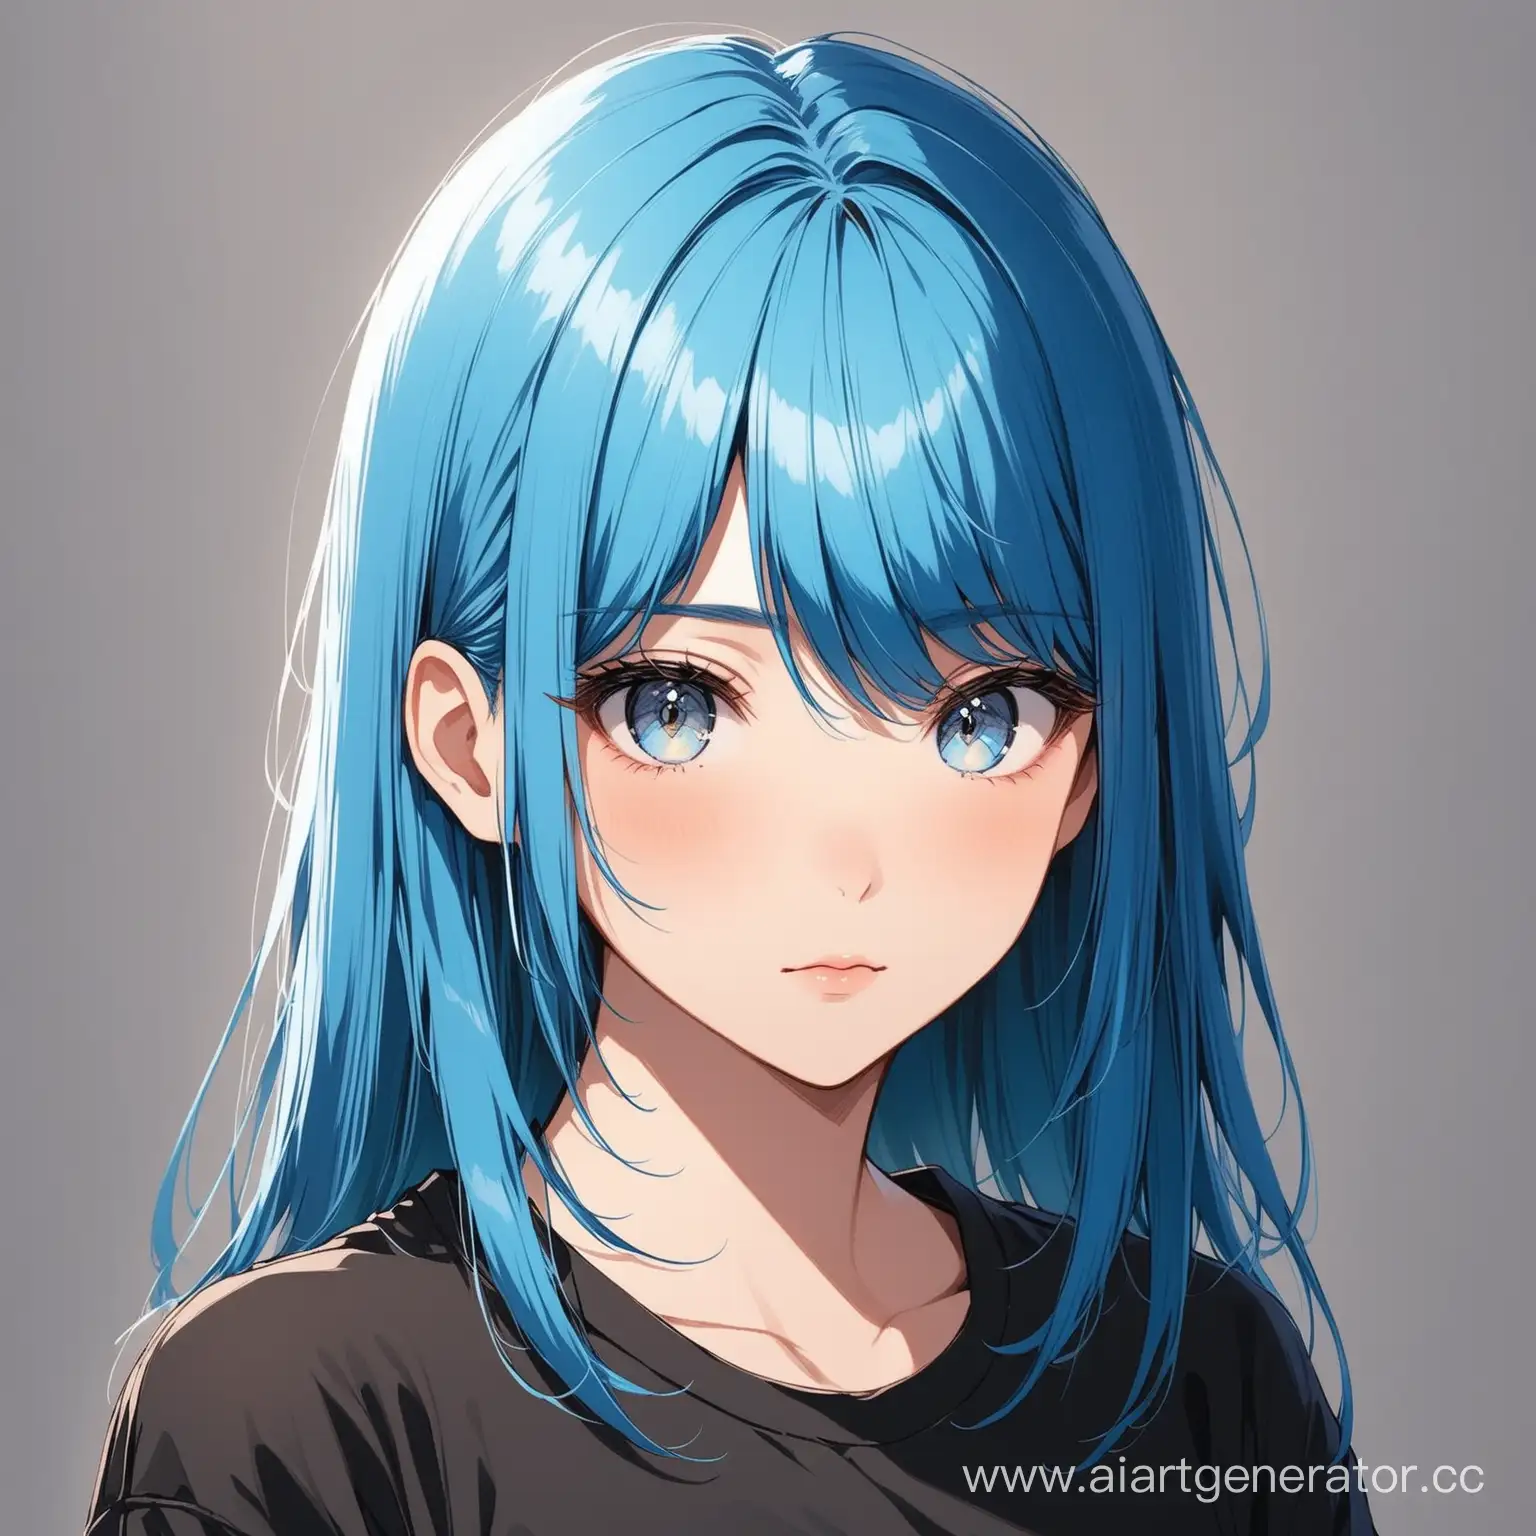 BlueHaired-Girl-with-Gray-Eyes-in-Black-Shirt